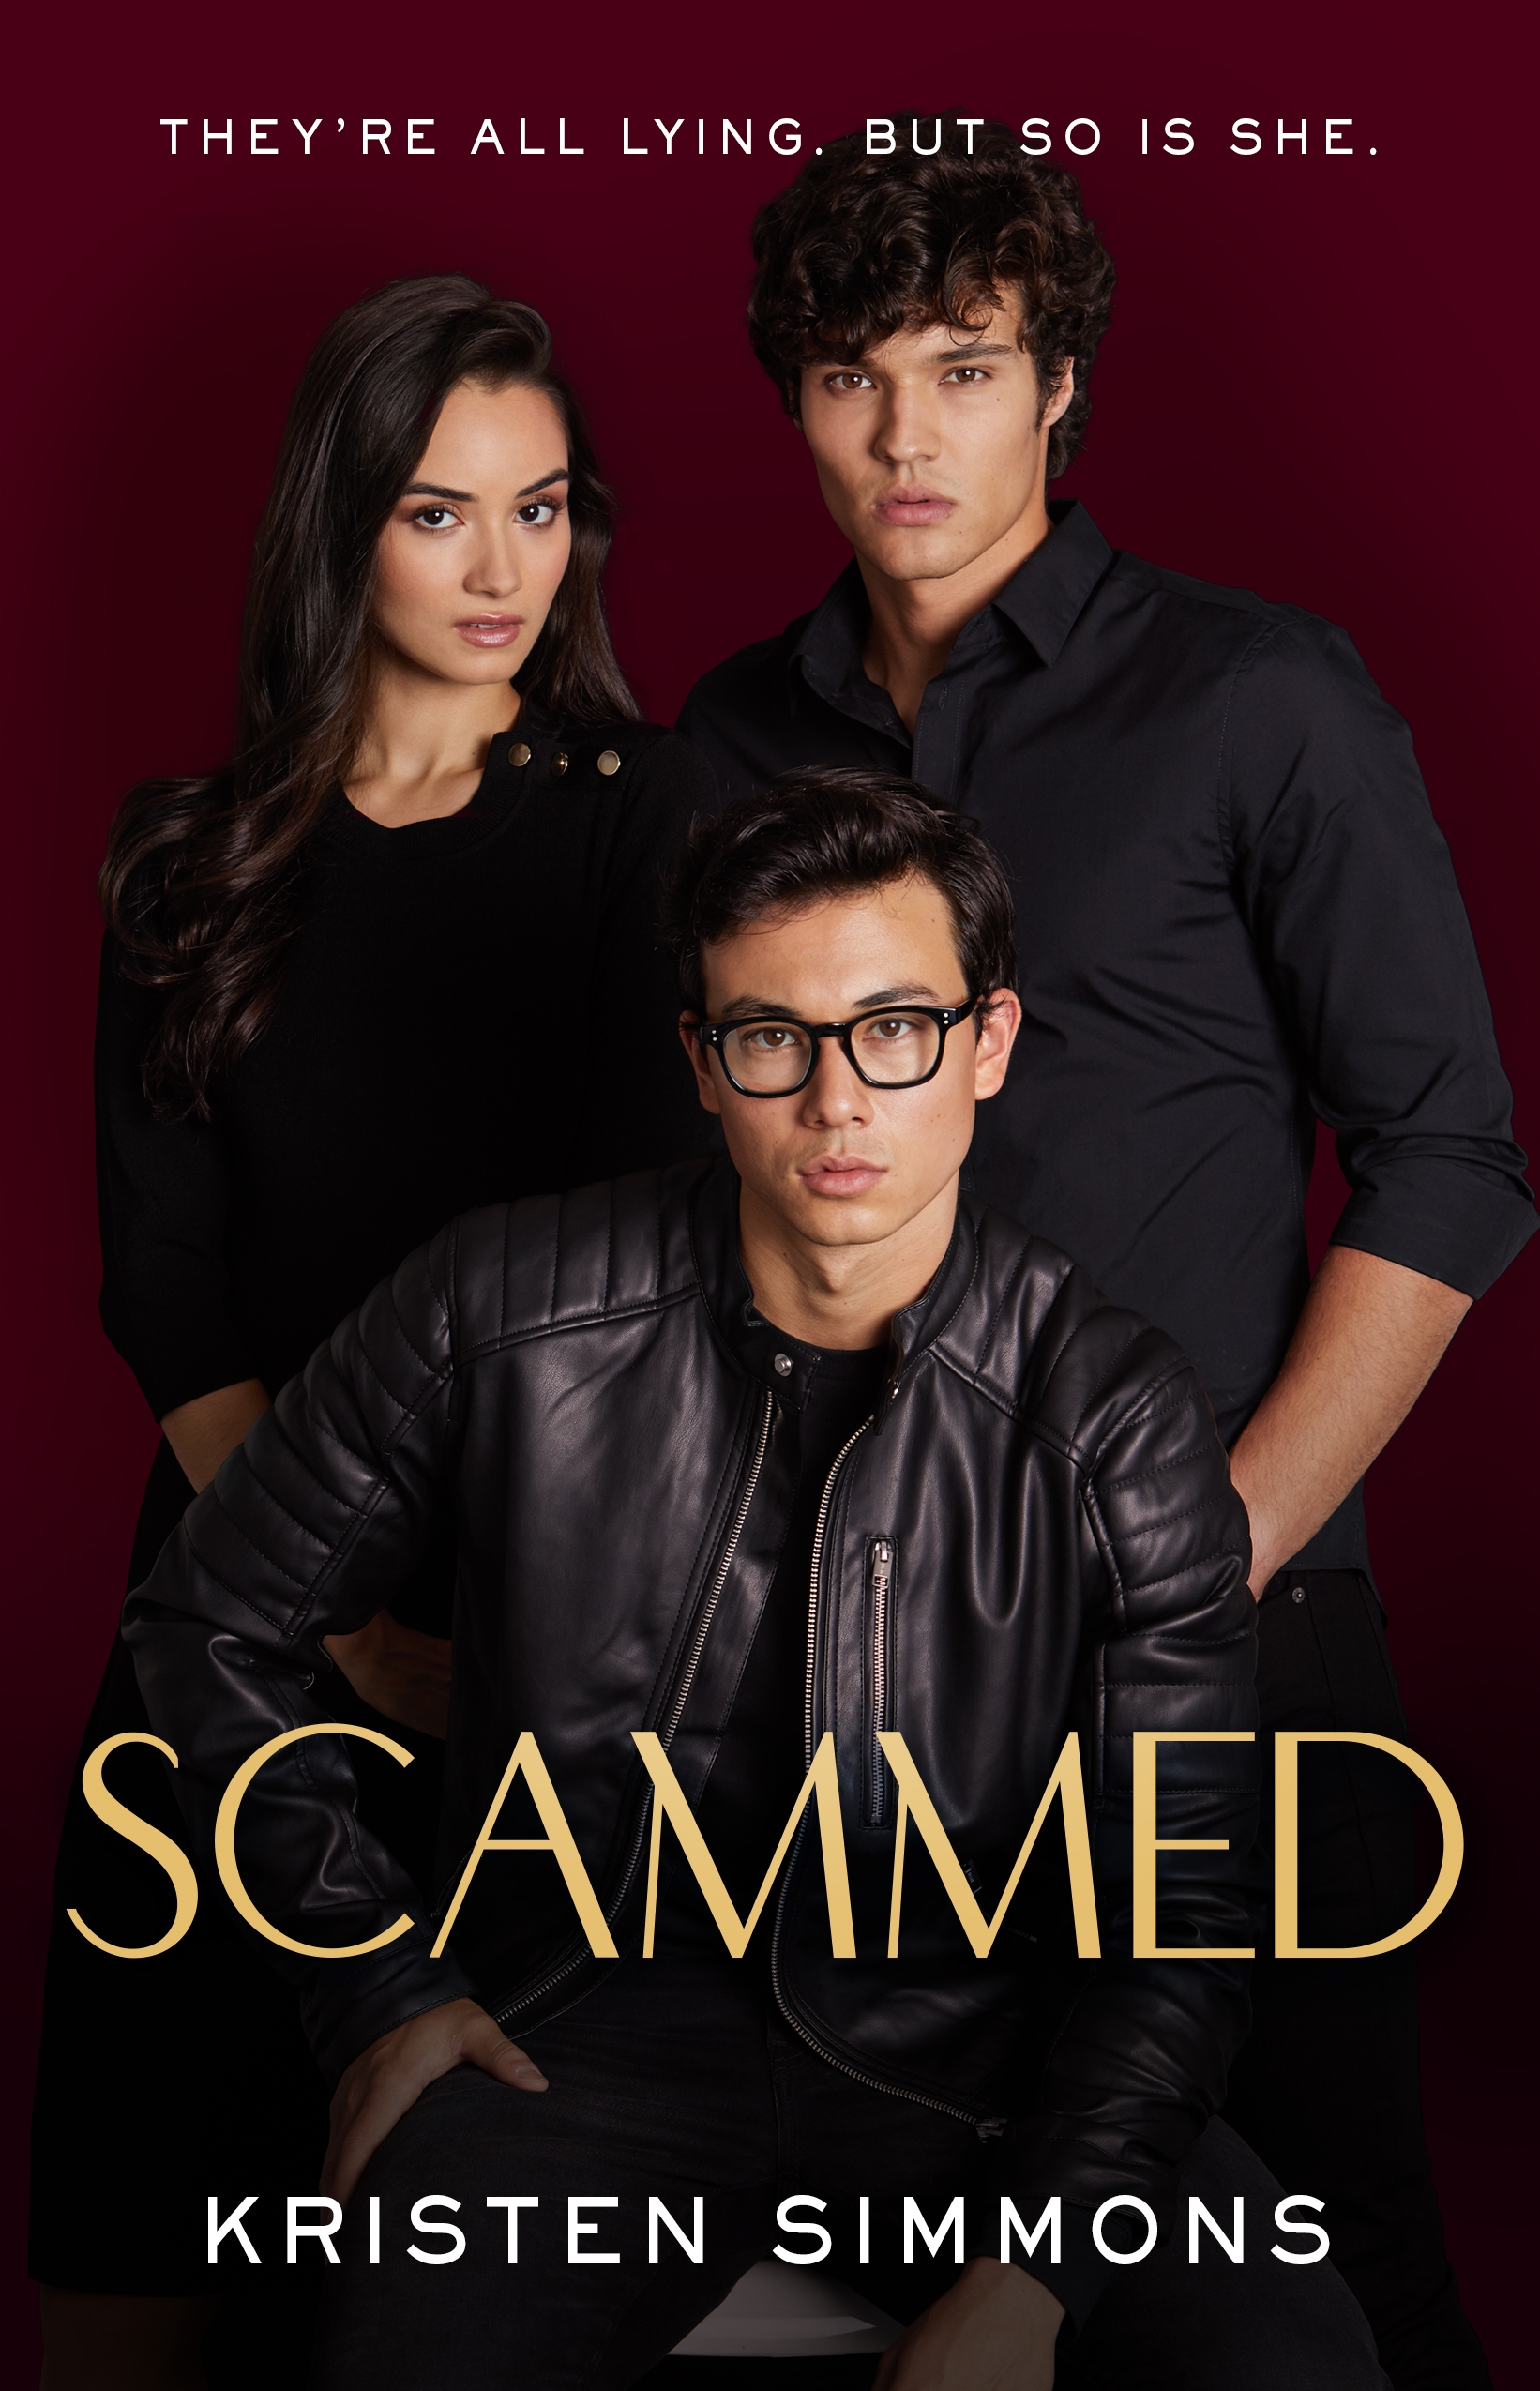 Scammed by Kristen Simmons